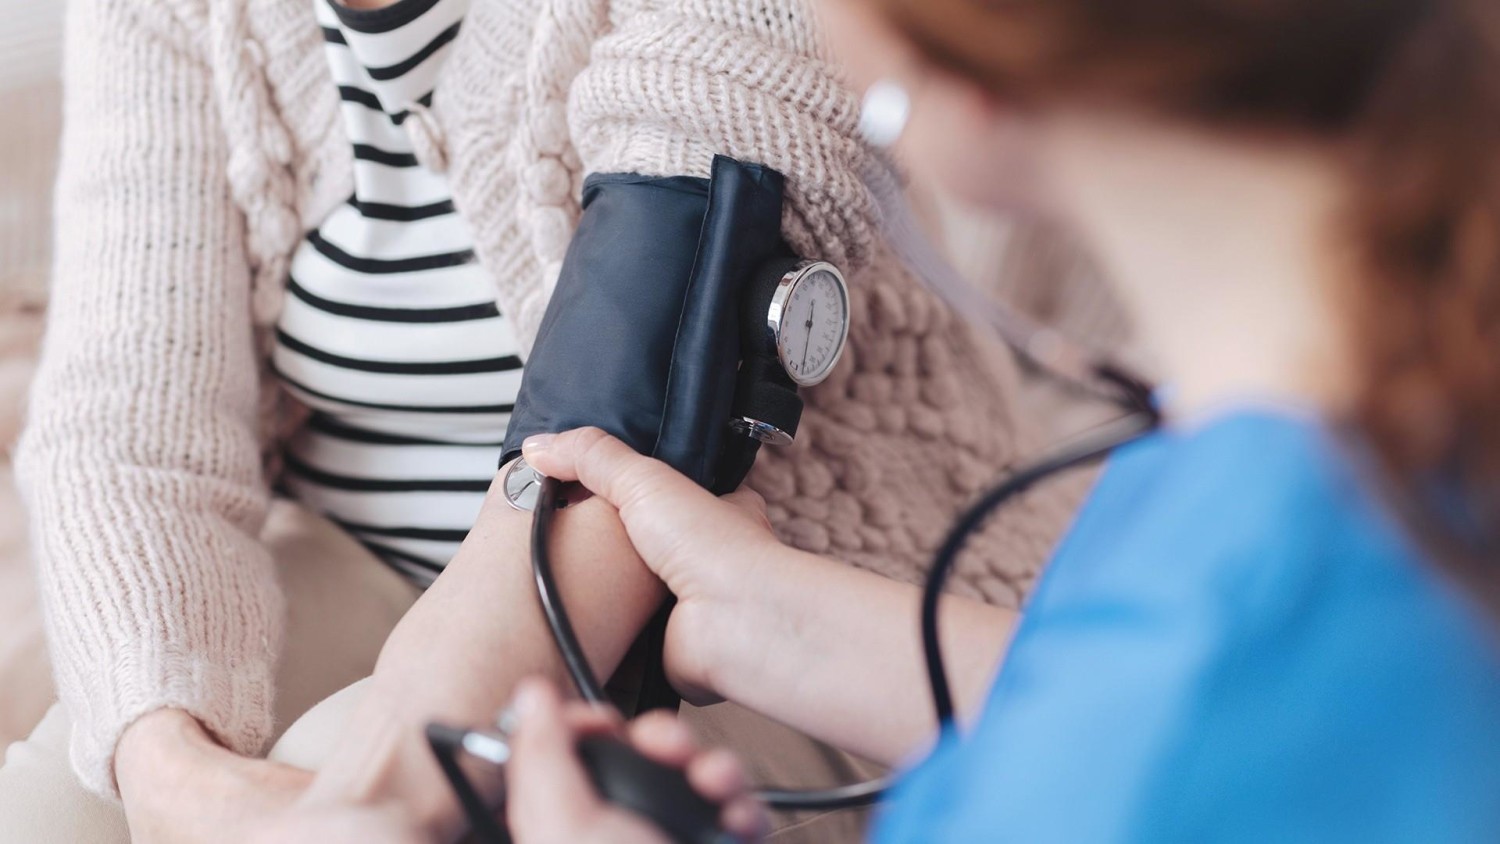 Why Should You Check Your Blood Pressure Regularly?